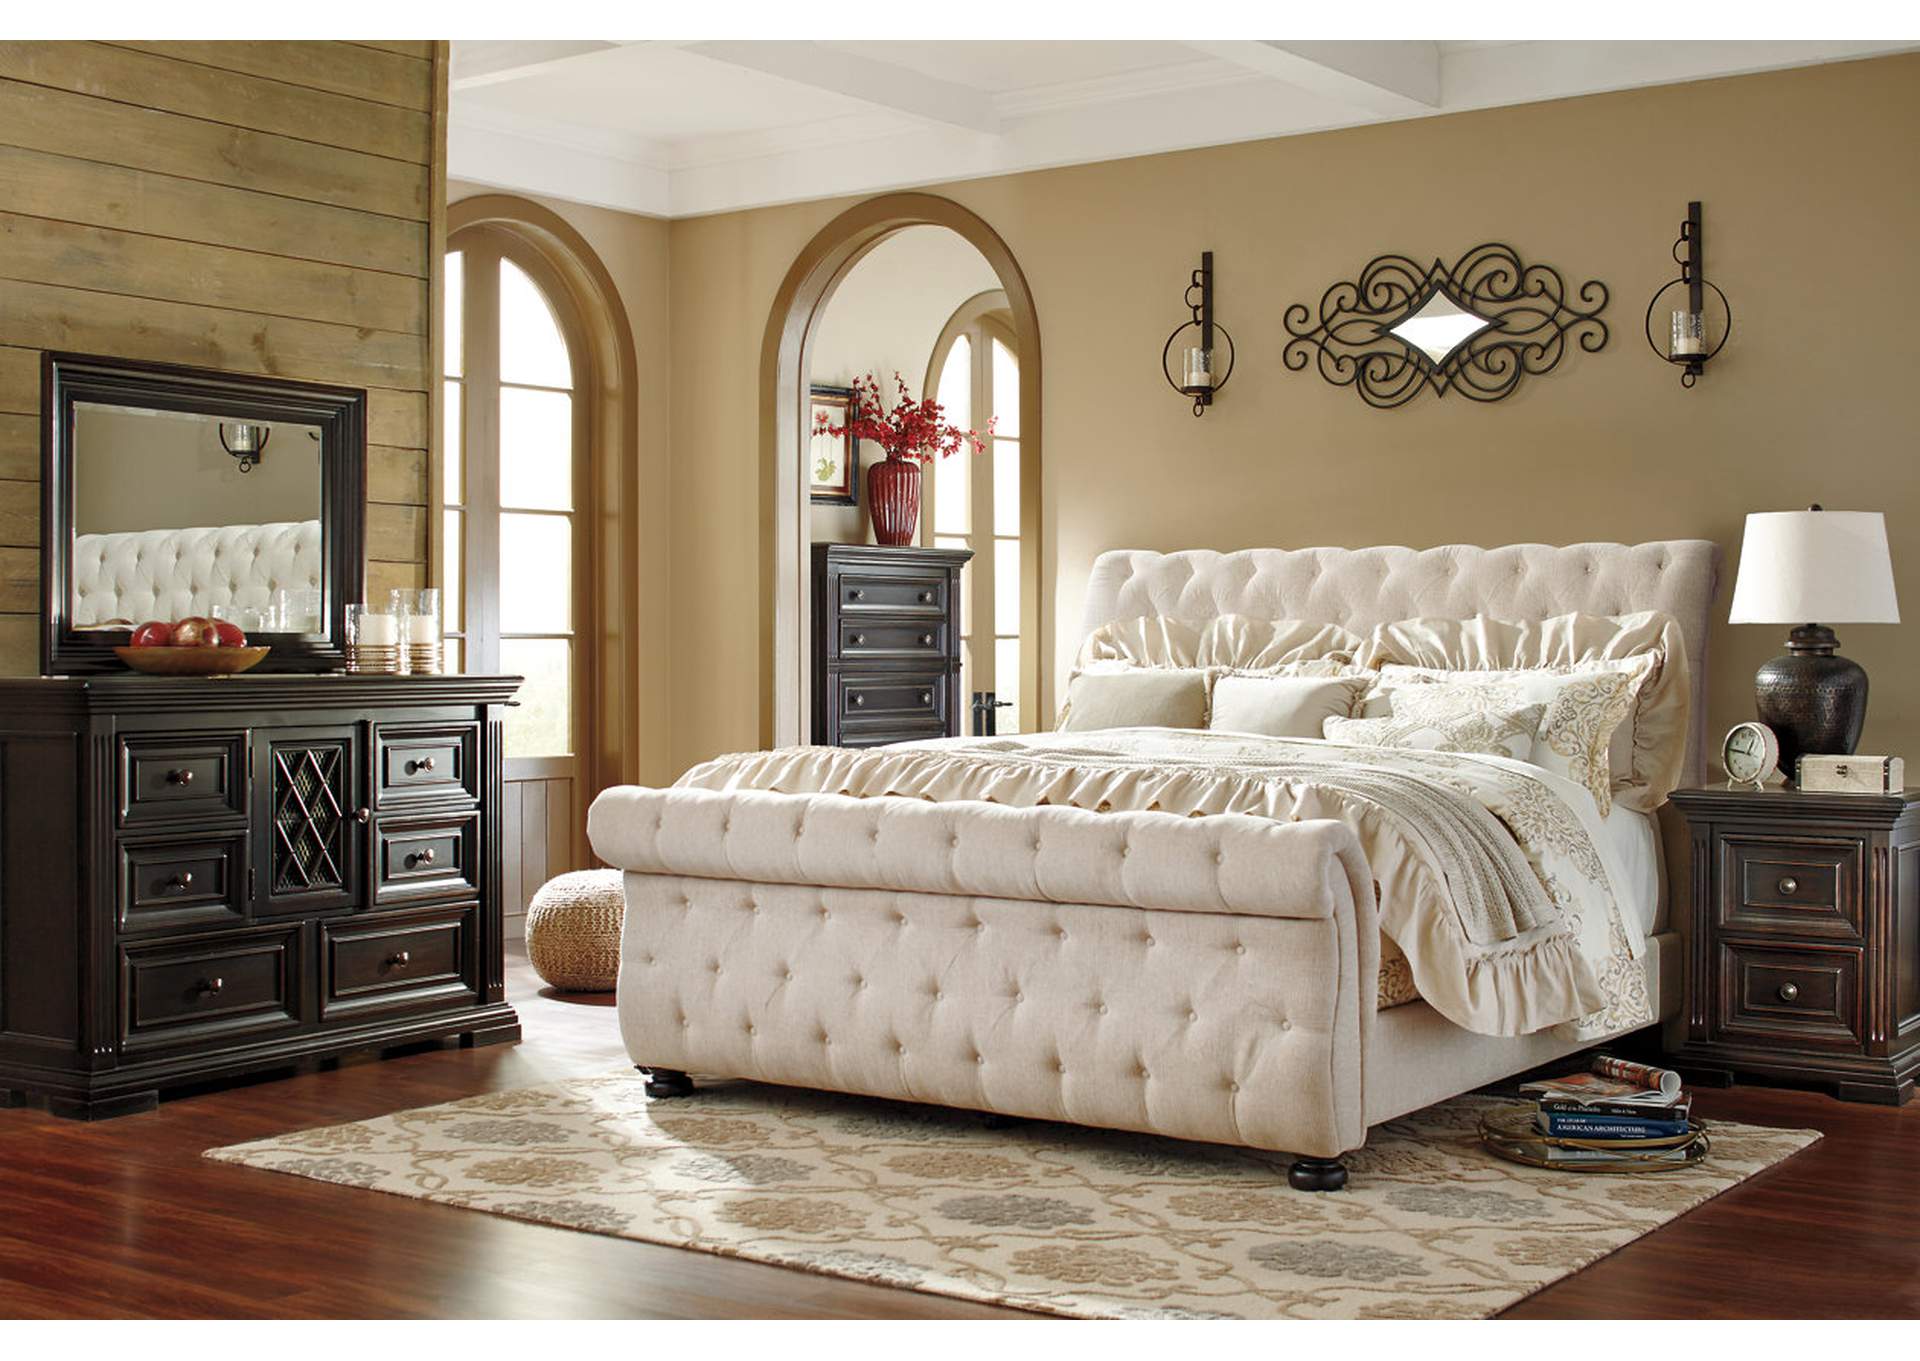 Willenburg Queen Upholstered Sleigh Bed,Signature Design By Ashley